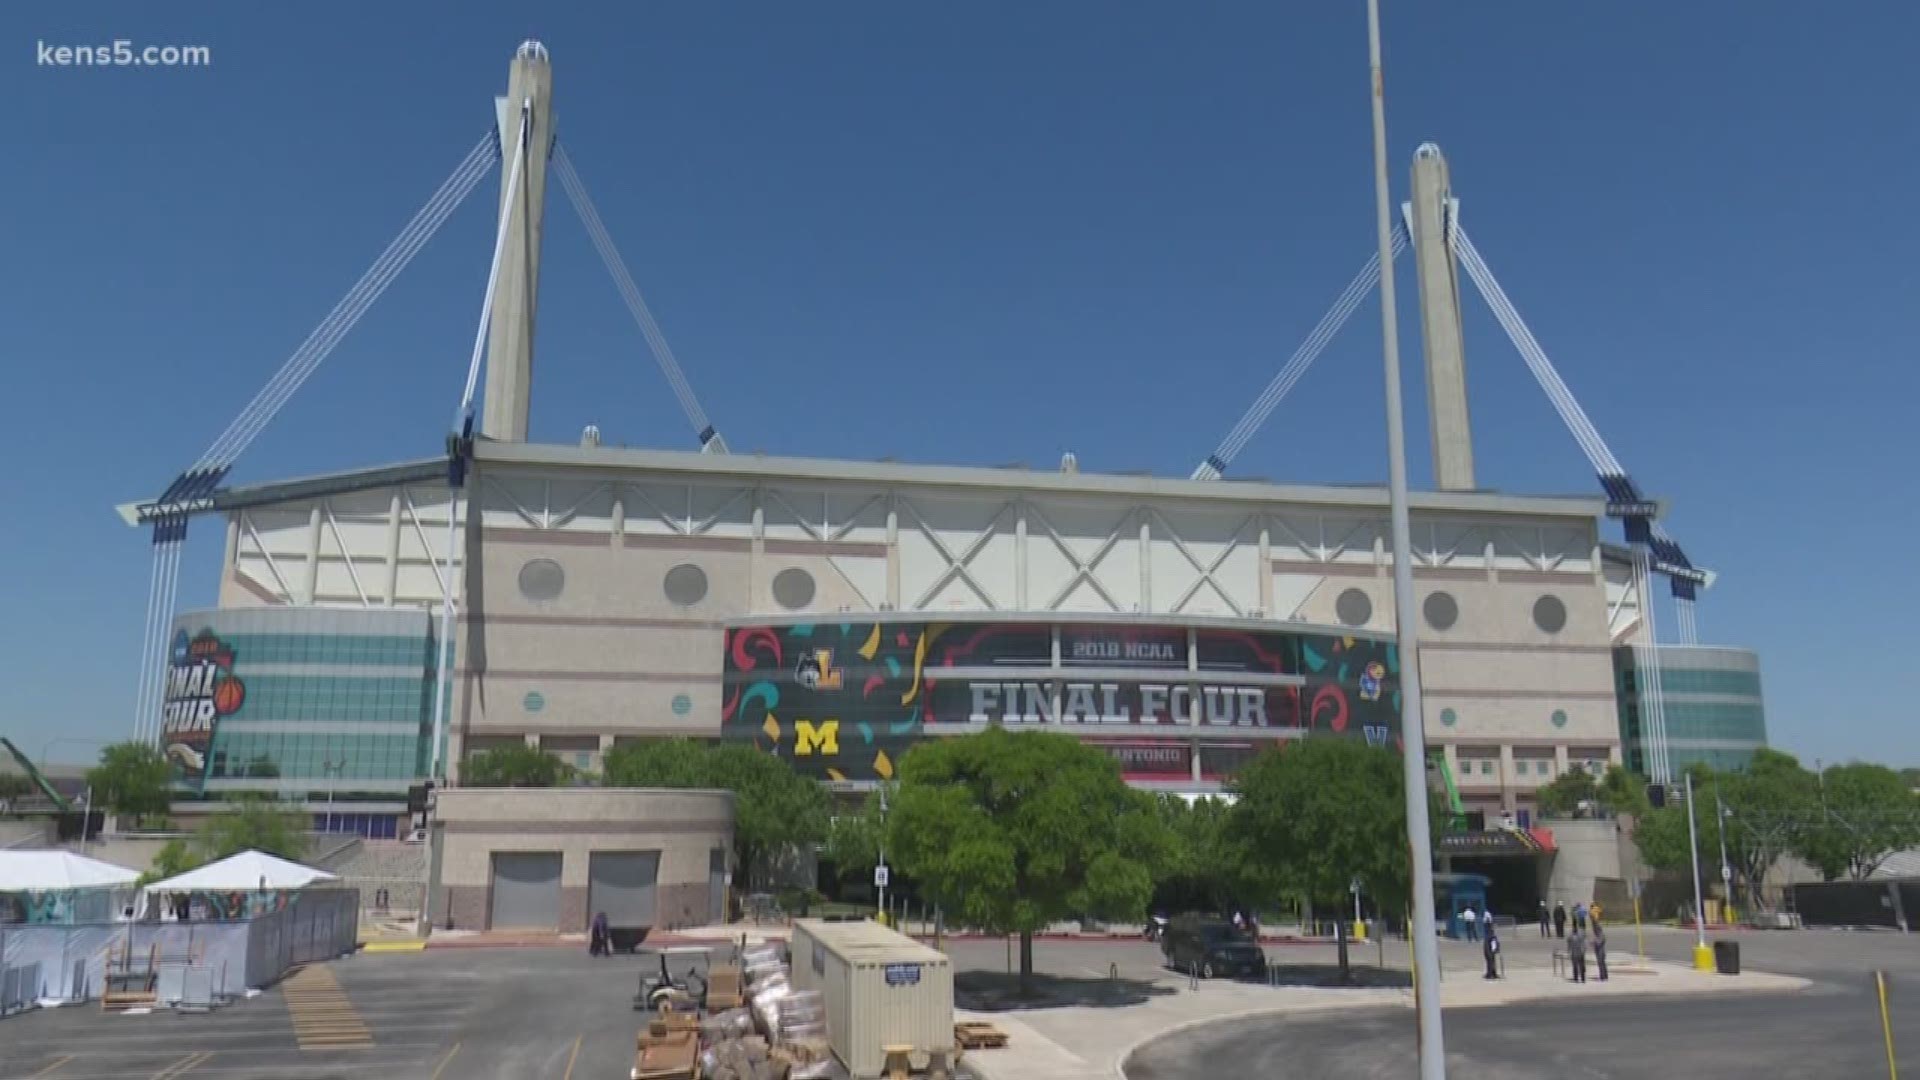 Monday's high-profile game was the culmination of a four-day event requiring intense security on the streets and behind the scenes here in San Antonio. Eyewitness news reporter Adi Guajardo has more.